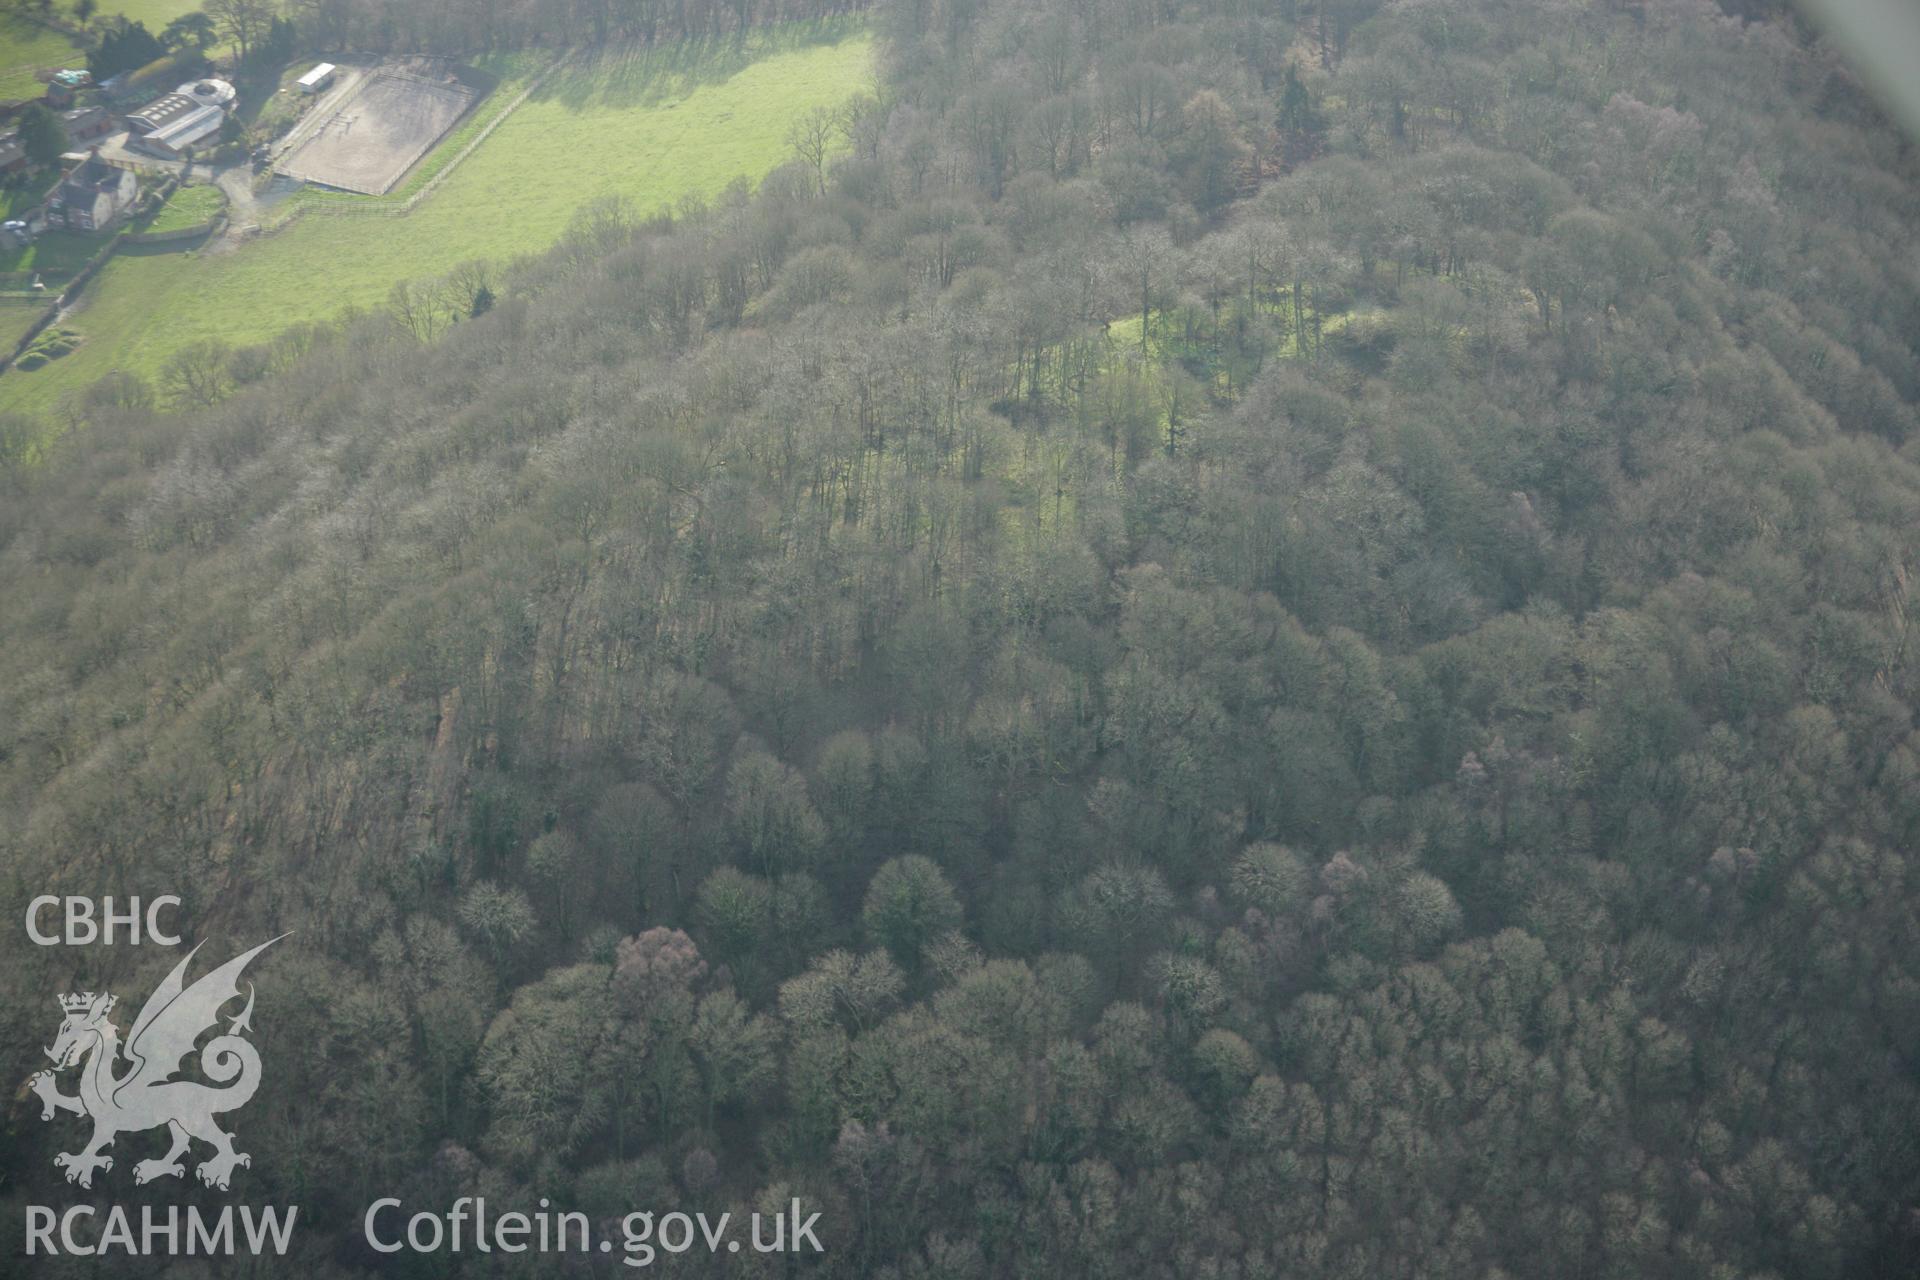 RCAHMW colour oblique aerial photograph of Gaer Fawr, Guilsfield. Taken on 25 January 2007 by Toby Driver